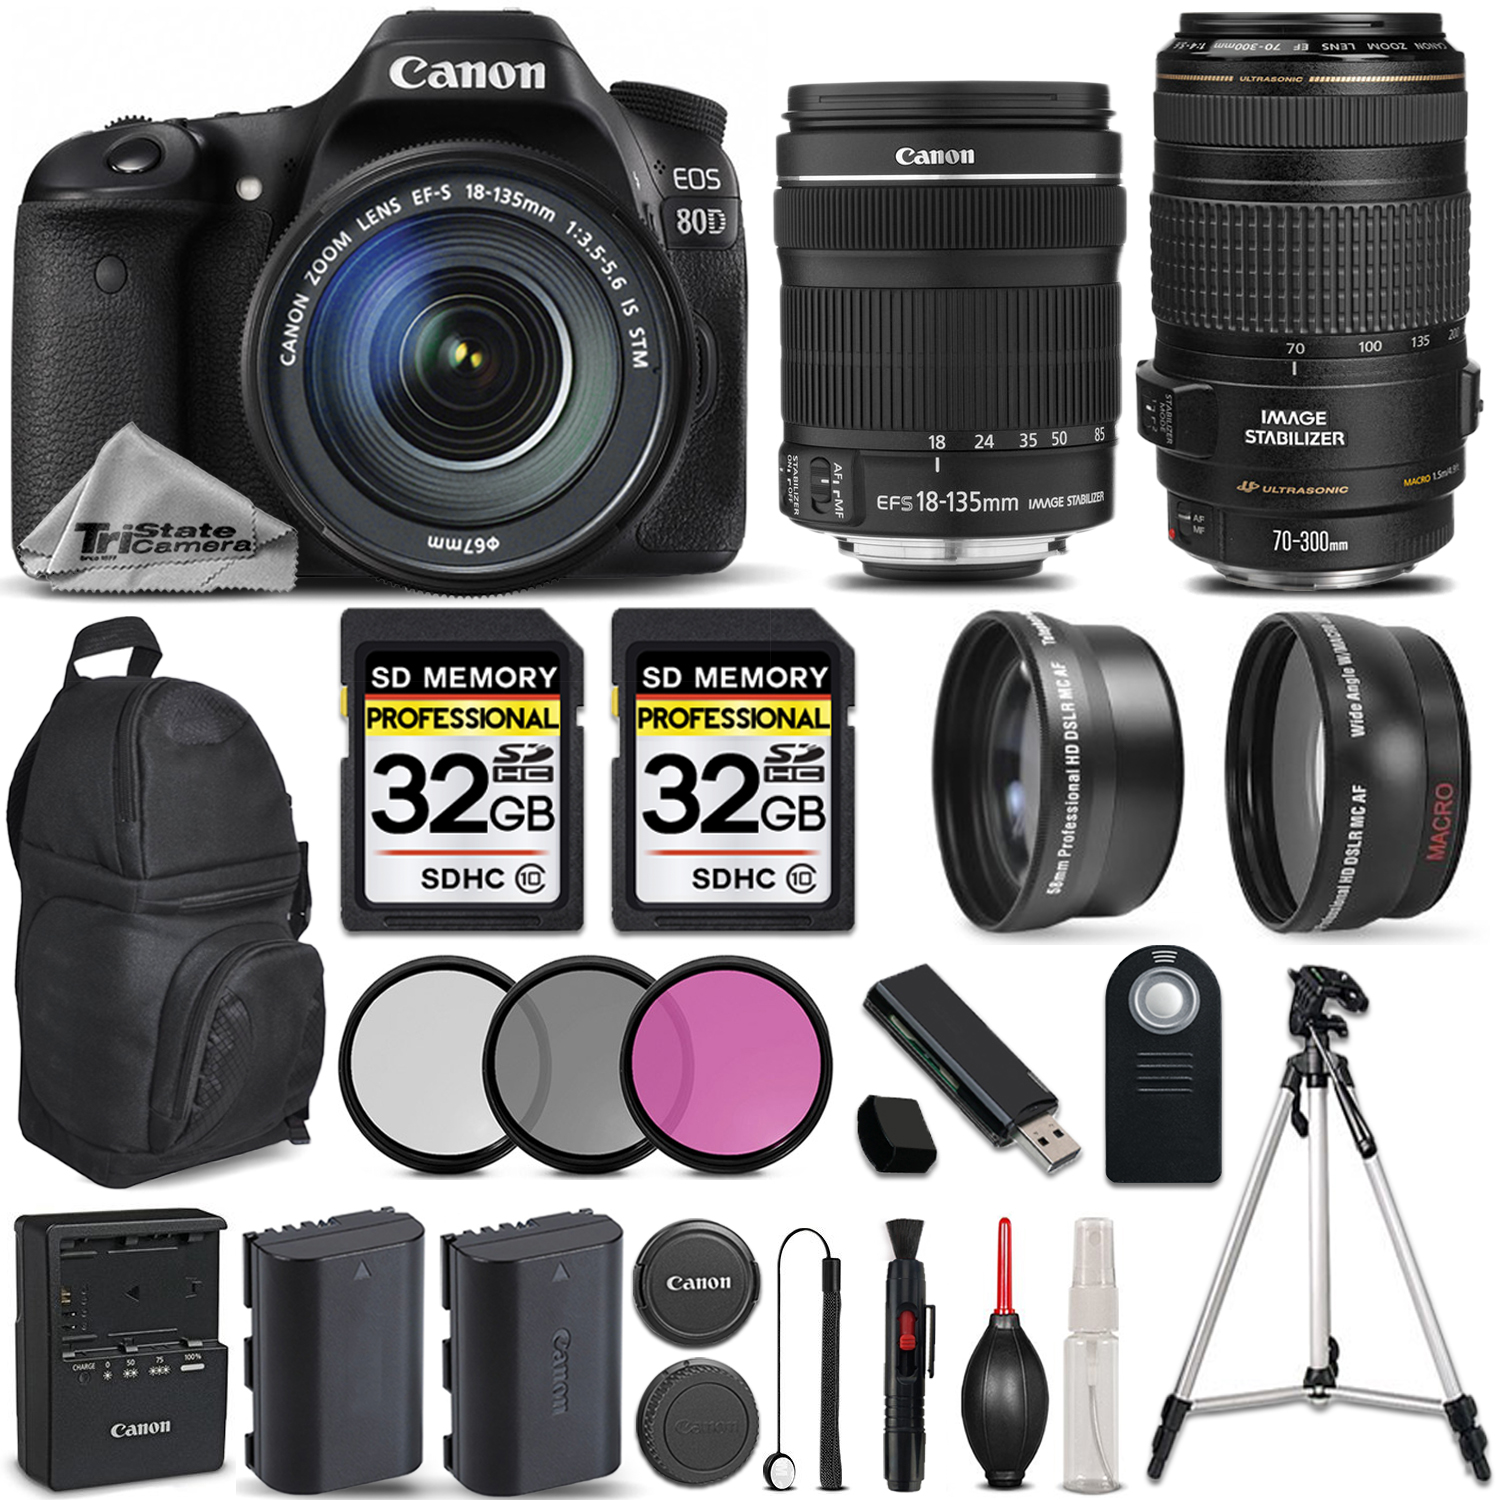 EOS 80D DSLR Camera with 18-135mm IS STM Lens +Canon 70-300 USM +BACKPACK *FREE SHIPPING*